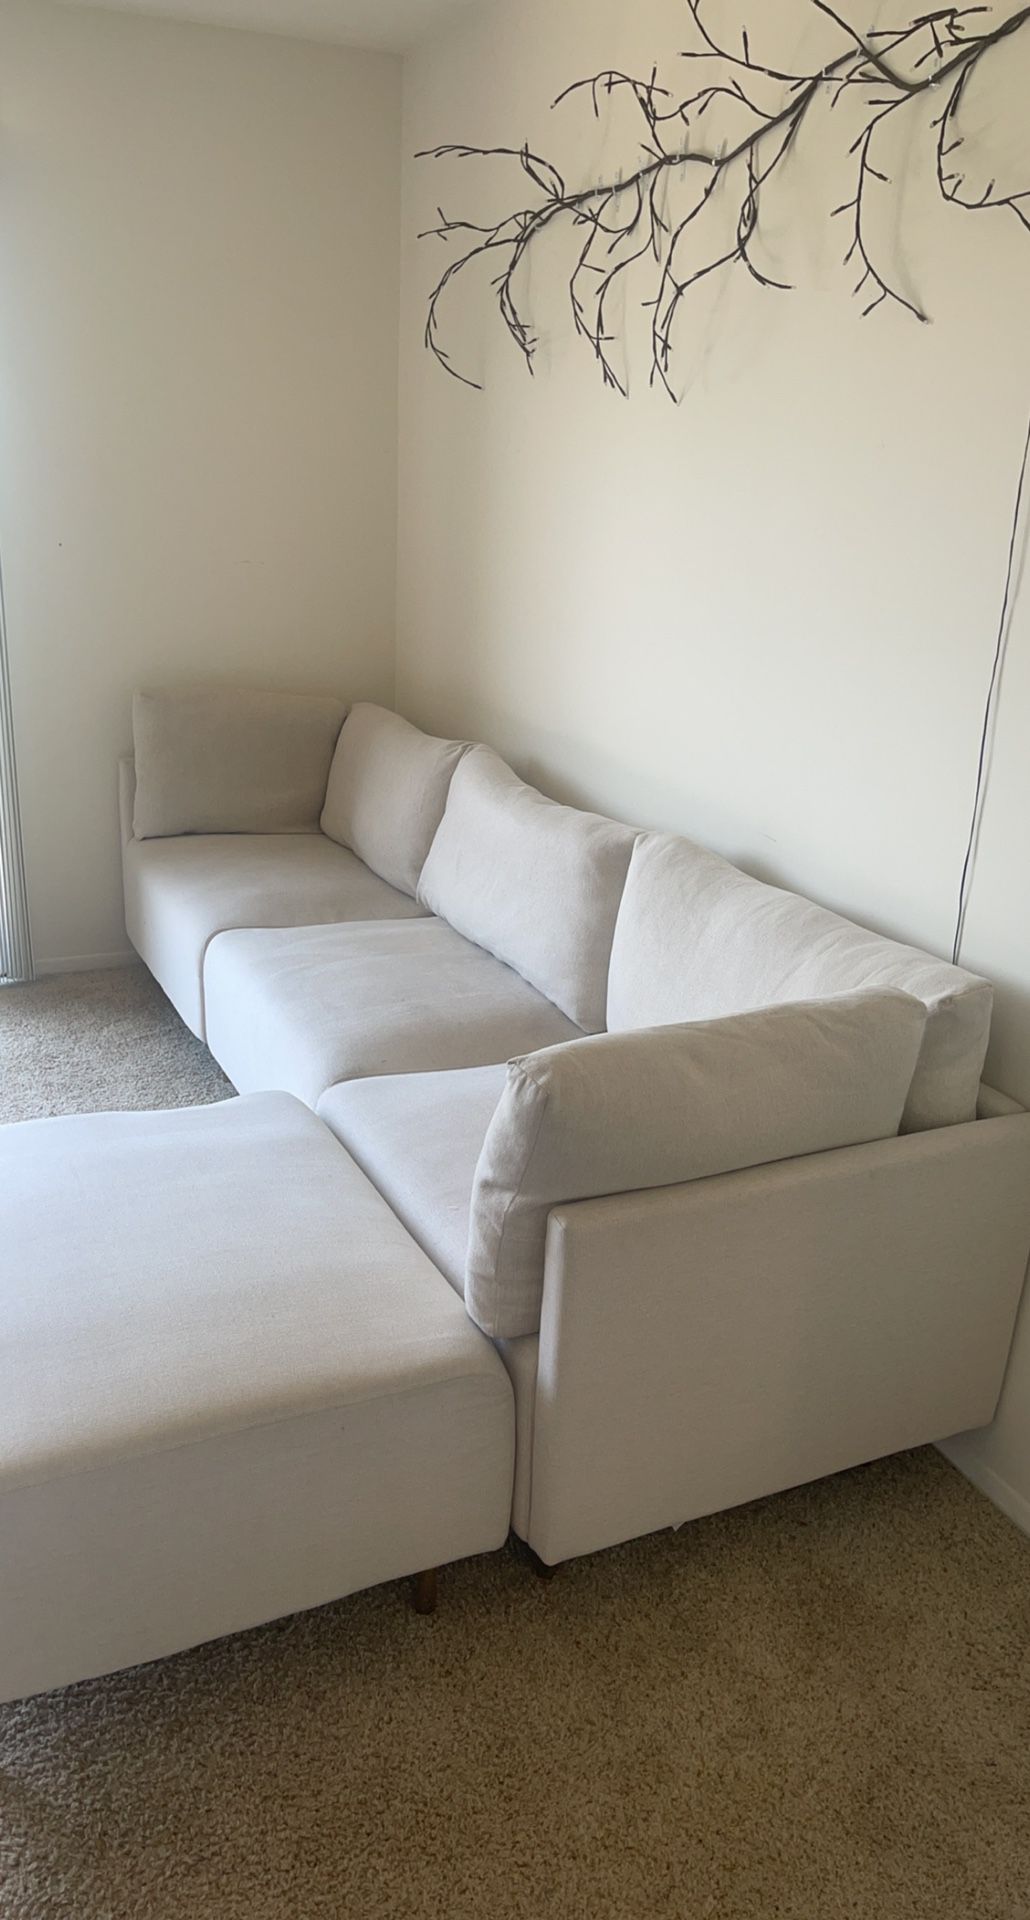 Beige Sectional Couch